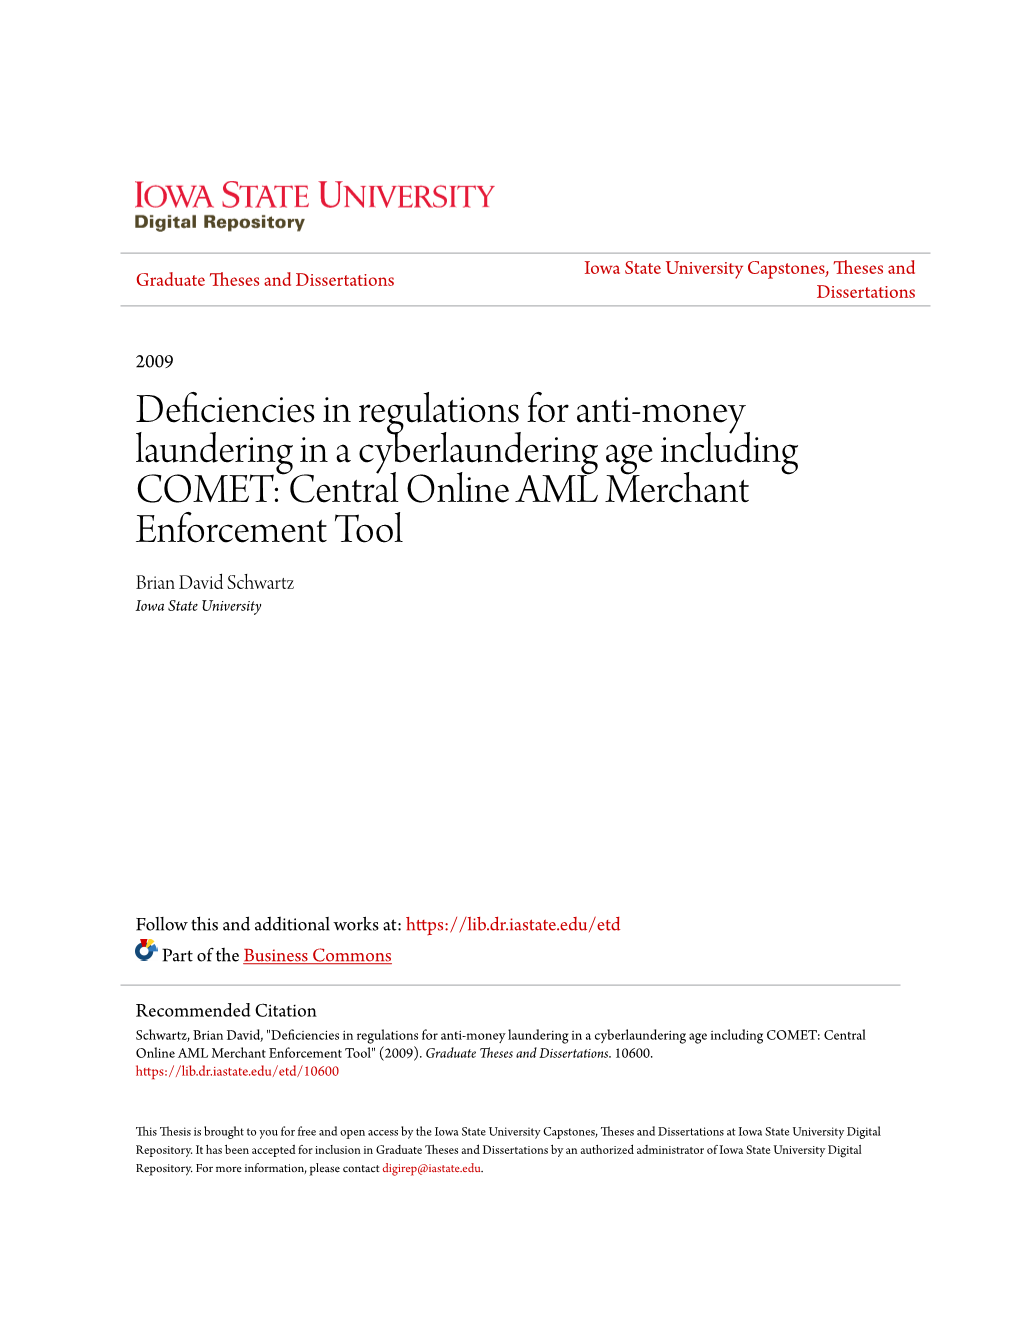 Deficiencies in Regulations for Anti-Money Laundering in A